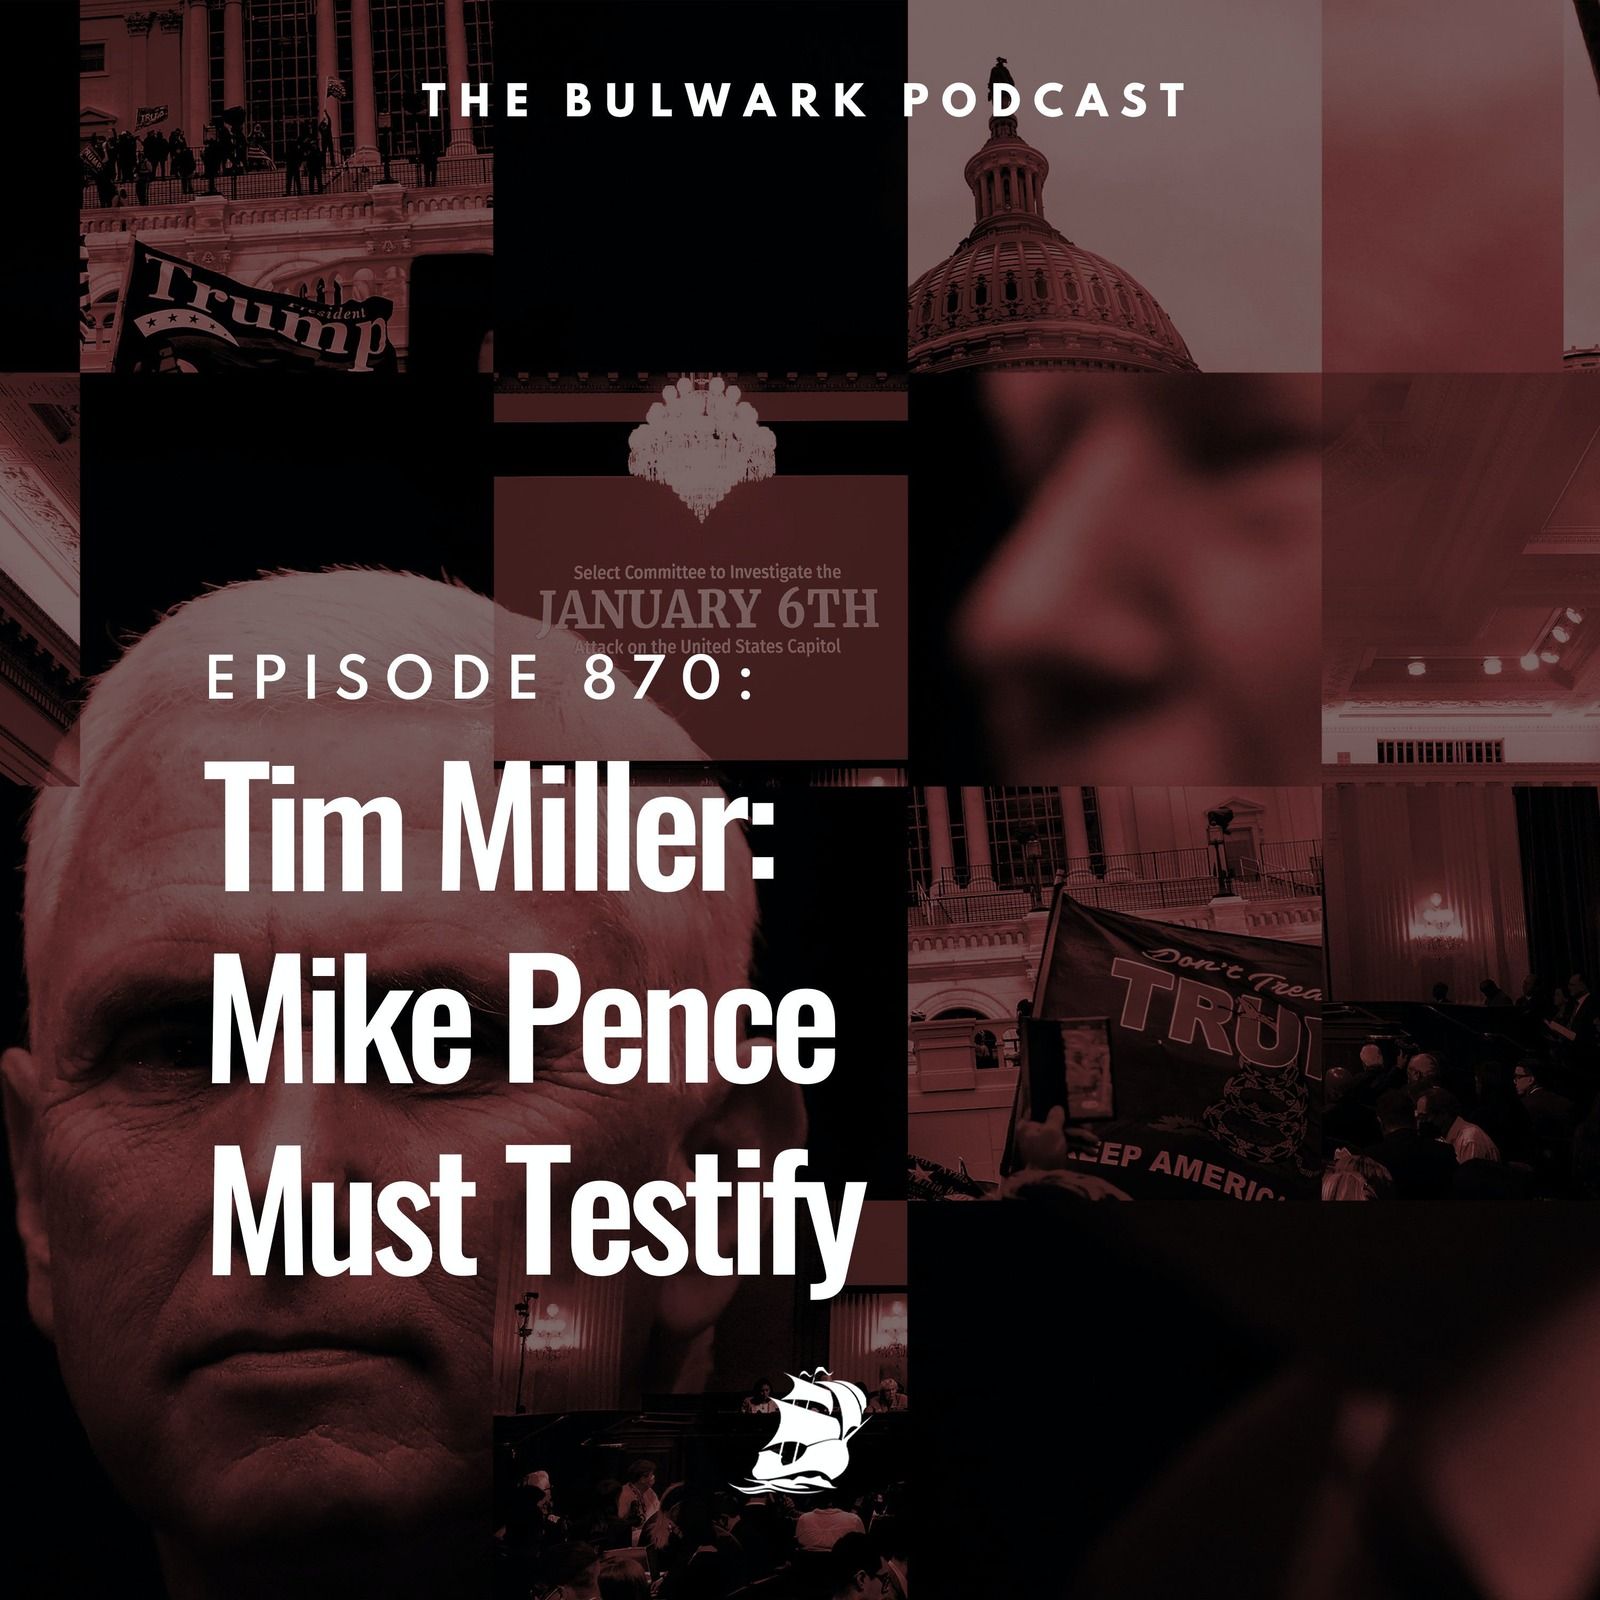 Tim Miller: Mike Pence Must Testify by The Bulwark Podcast